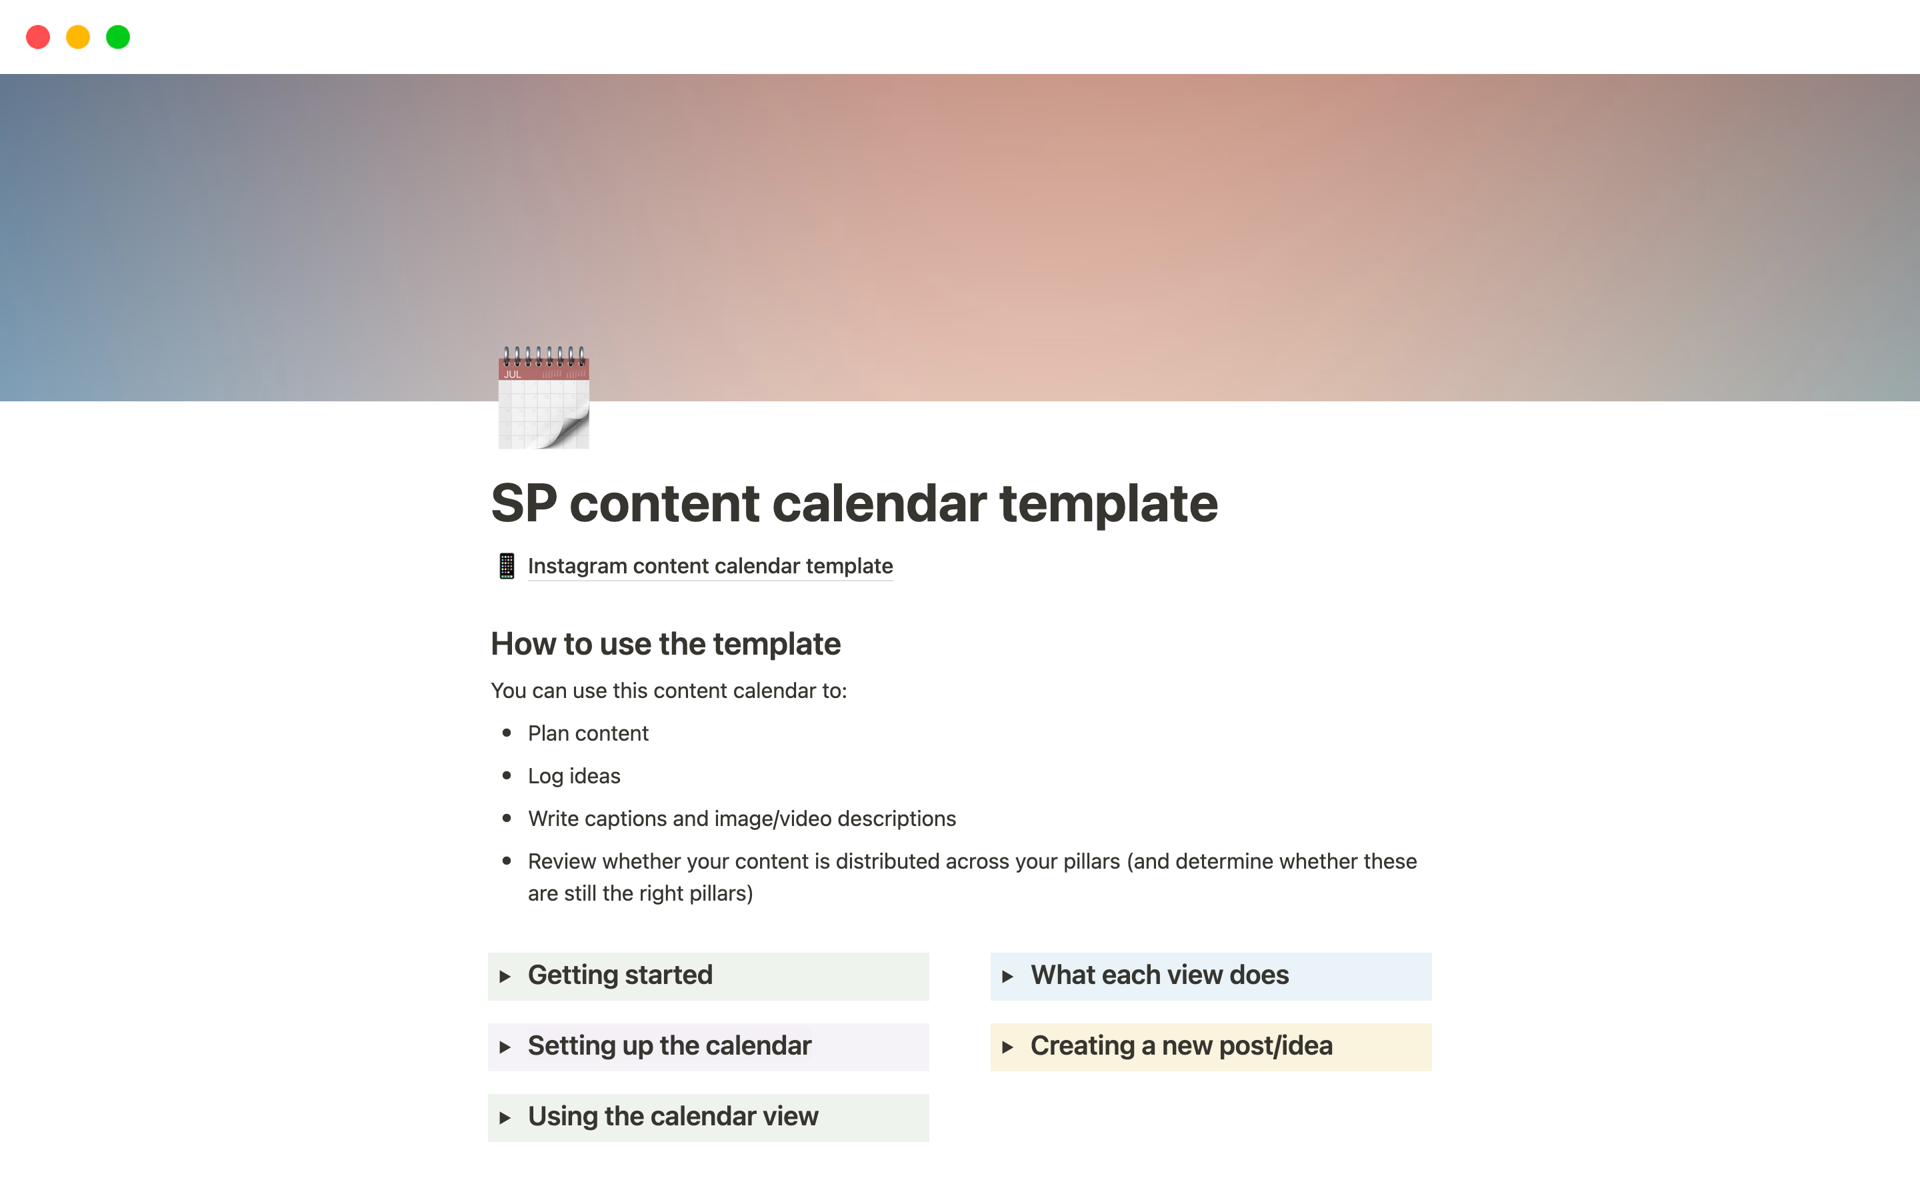 This template is designed to help creators plan content, jot down ideas and keep them organized, write captions and image/video descriptions, and review how well your content is distributed across your content pillars.